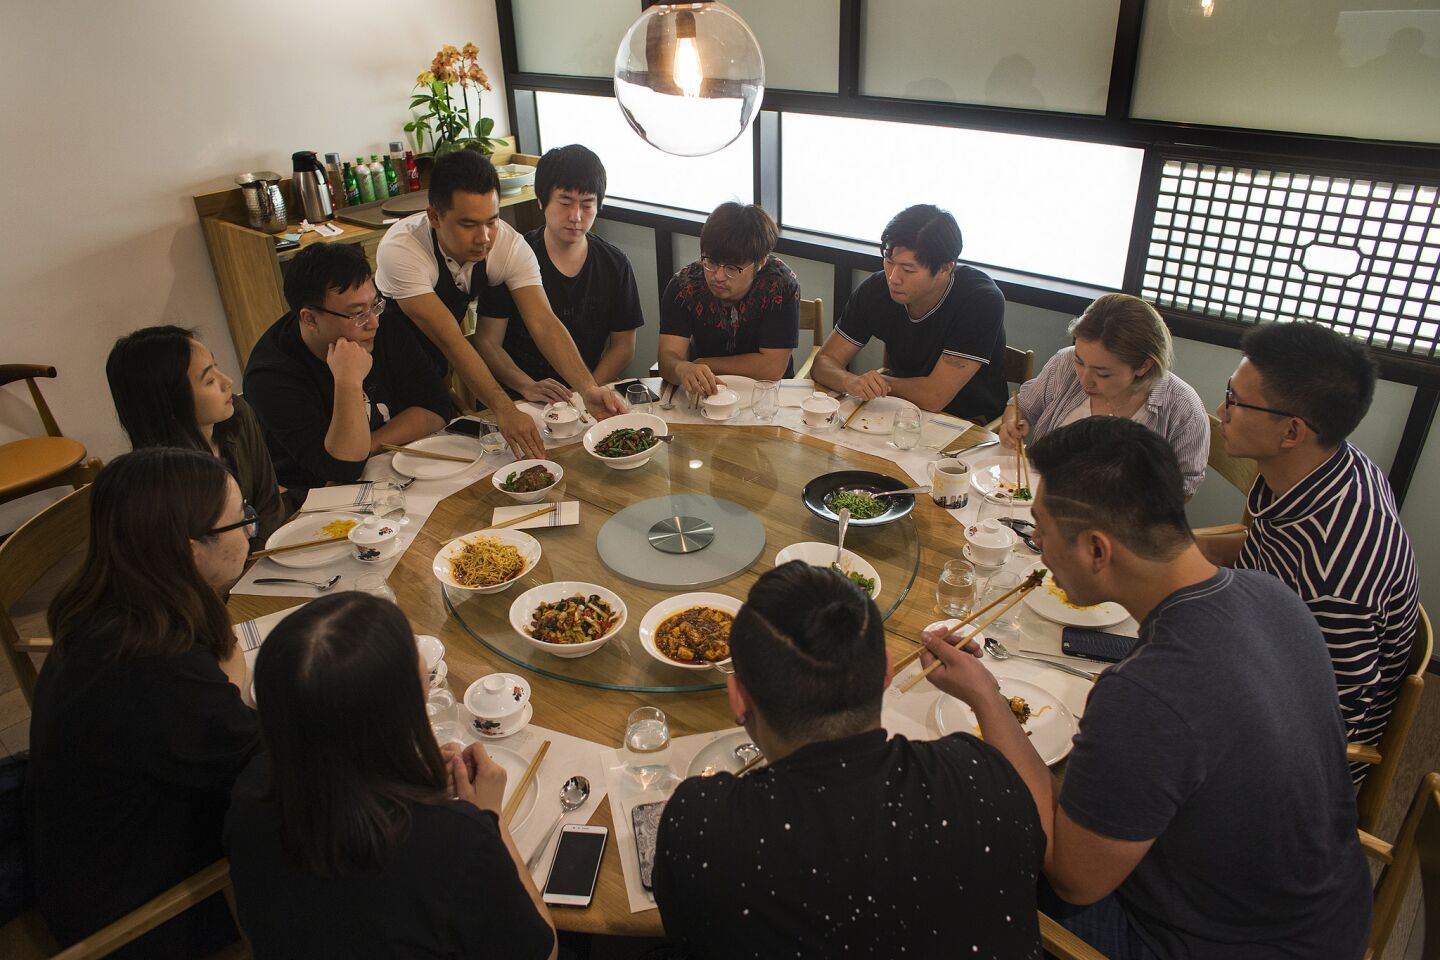 Customers try a variety of Sichuan dishes in one of the private dining rooms.